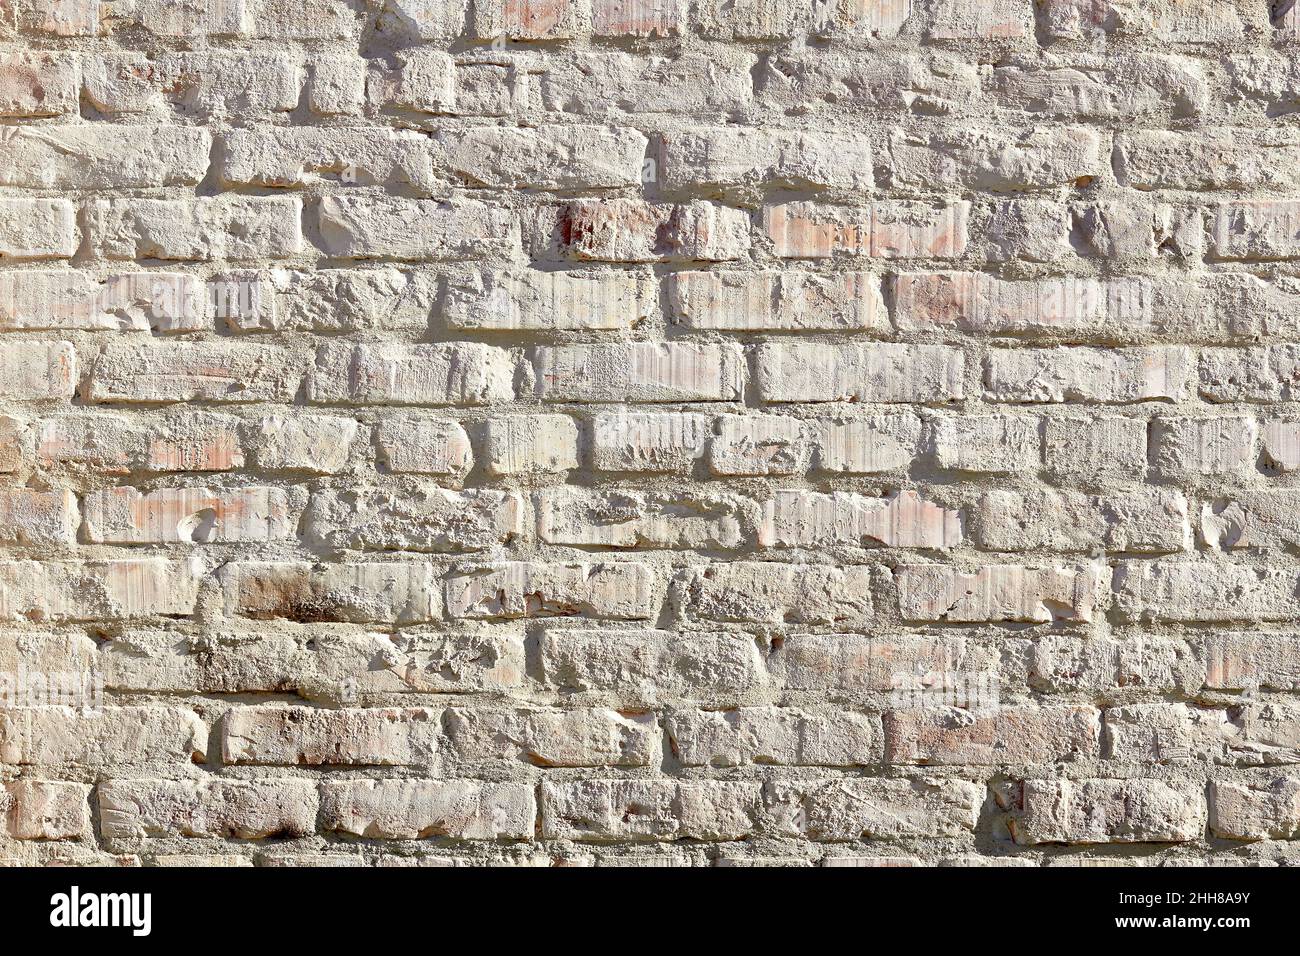 Old brick wall texture background Stock Photo